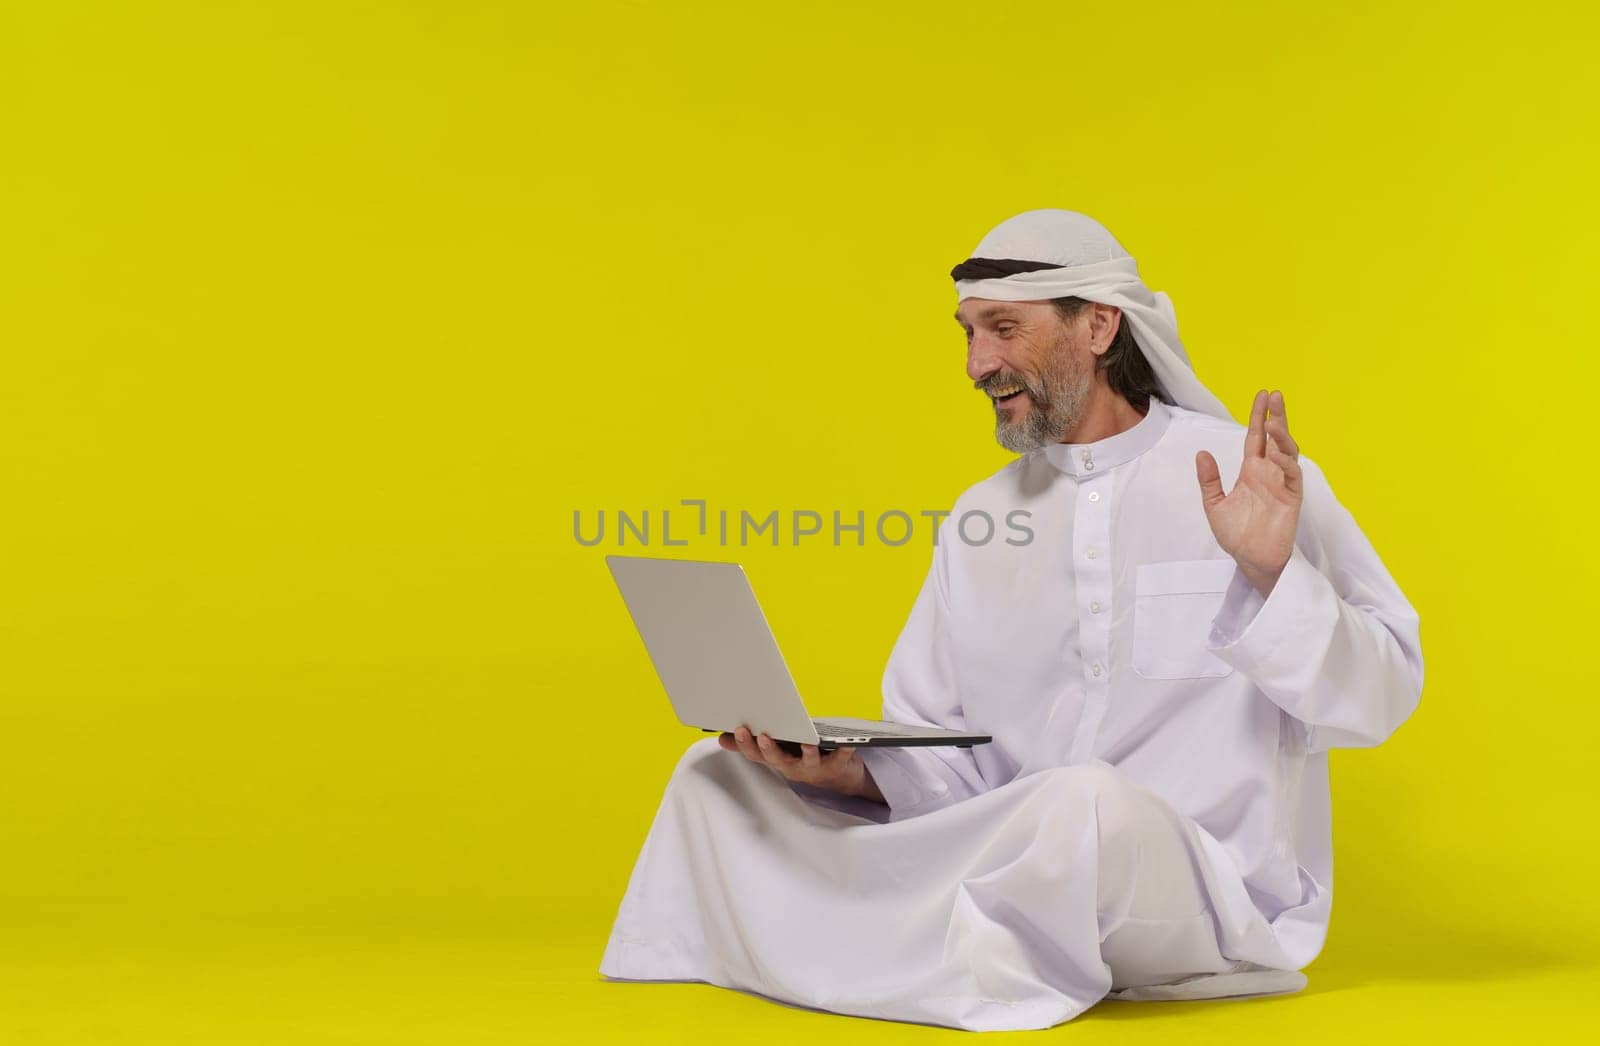 Concept online communication. Muslim person sitting on floor greets someone with their palm raised while holding a laptop in their hand. Copy space allows for easy customization and versatility and global connection through technology. High quality photo